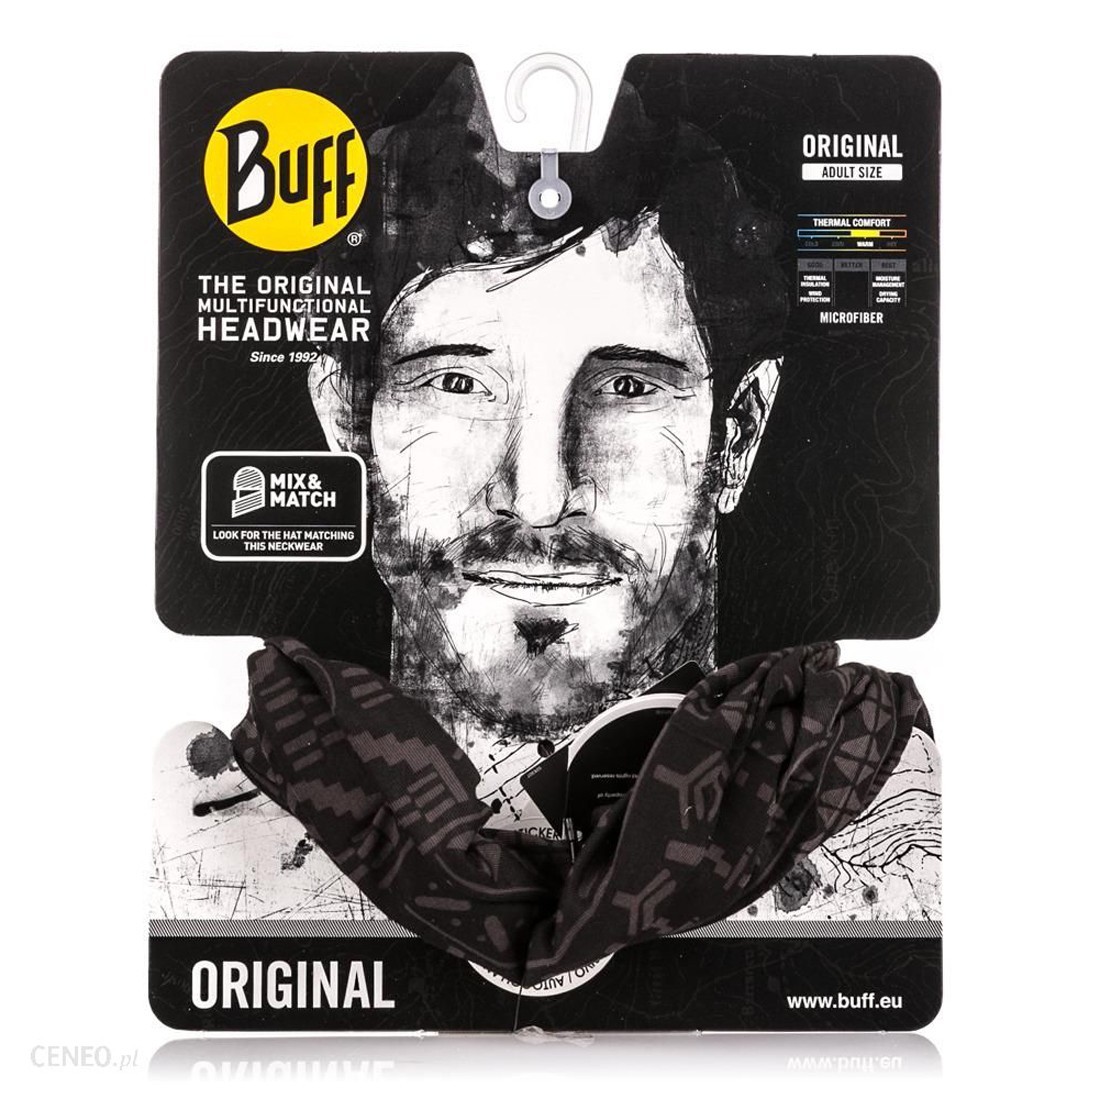 Buy Buff Original Gao - Buff, delivered to your home | TheOutfit